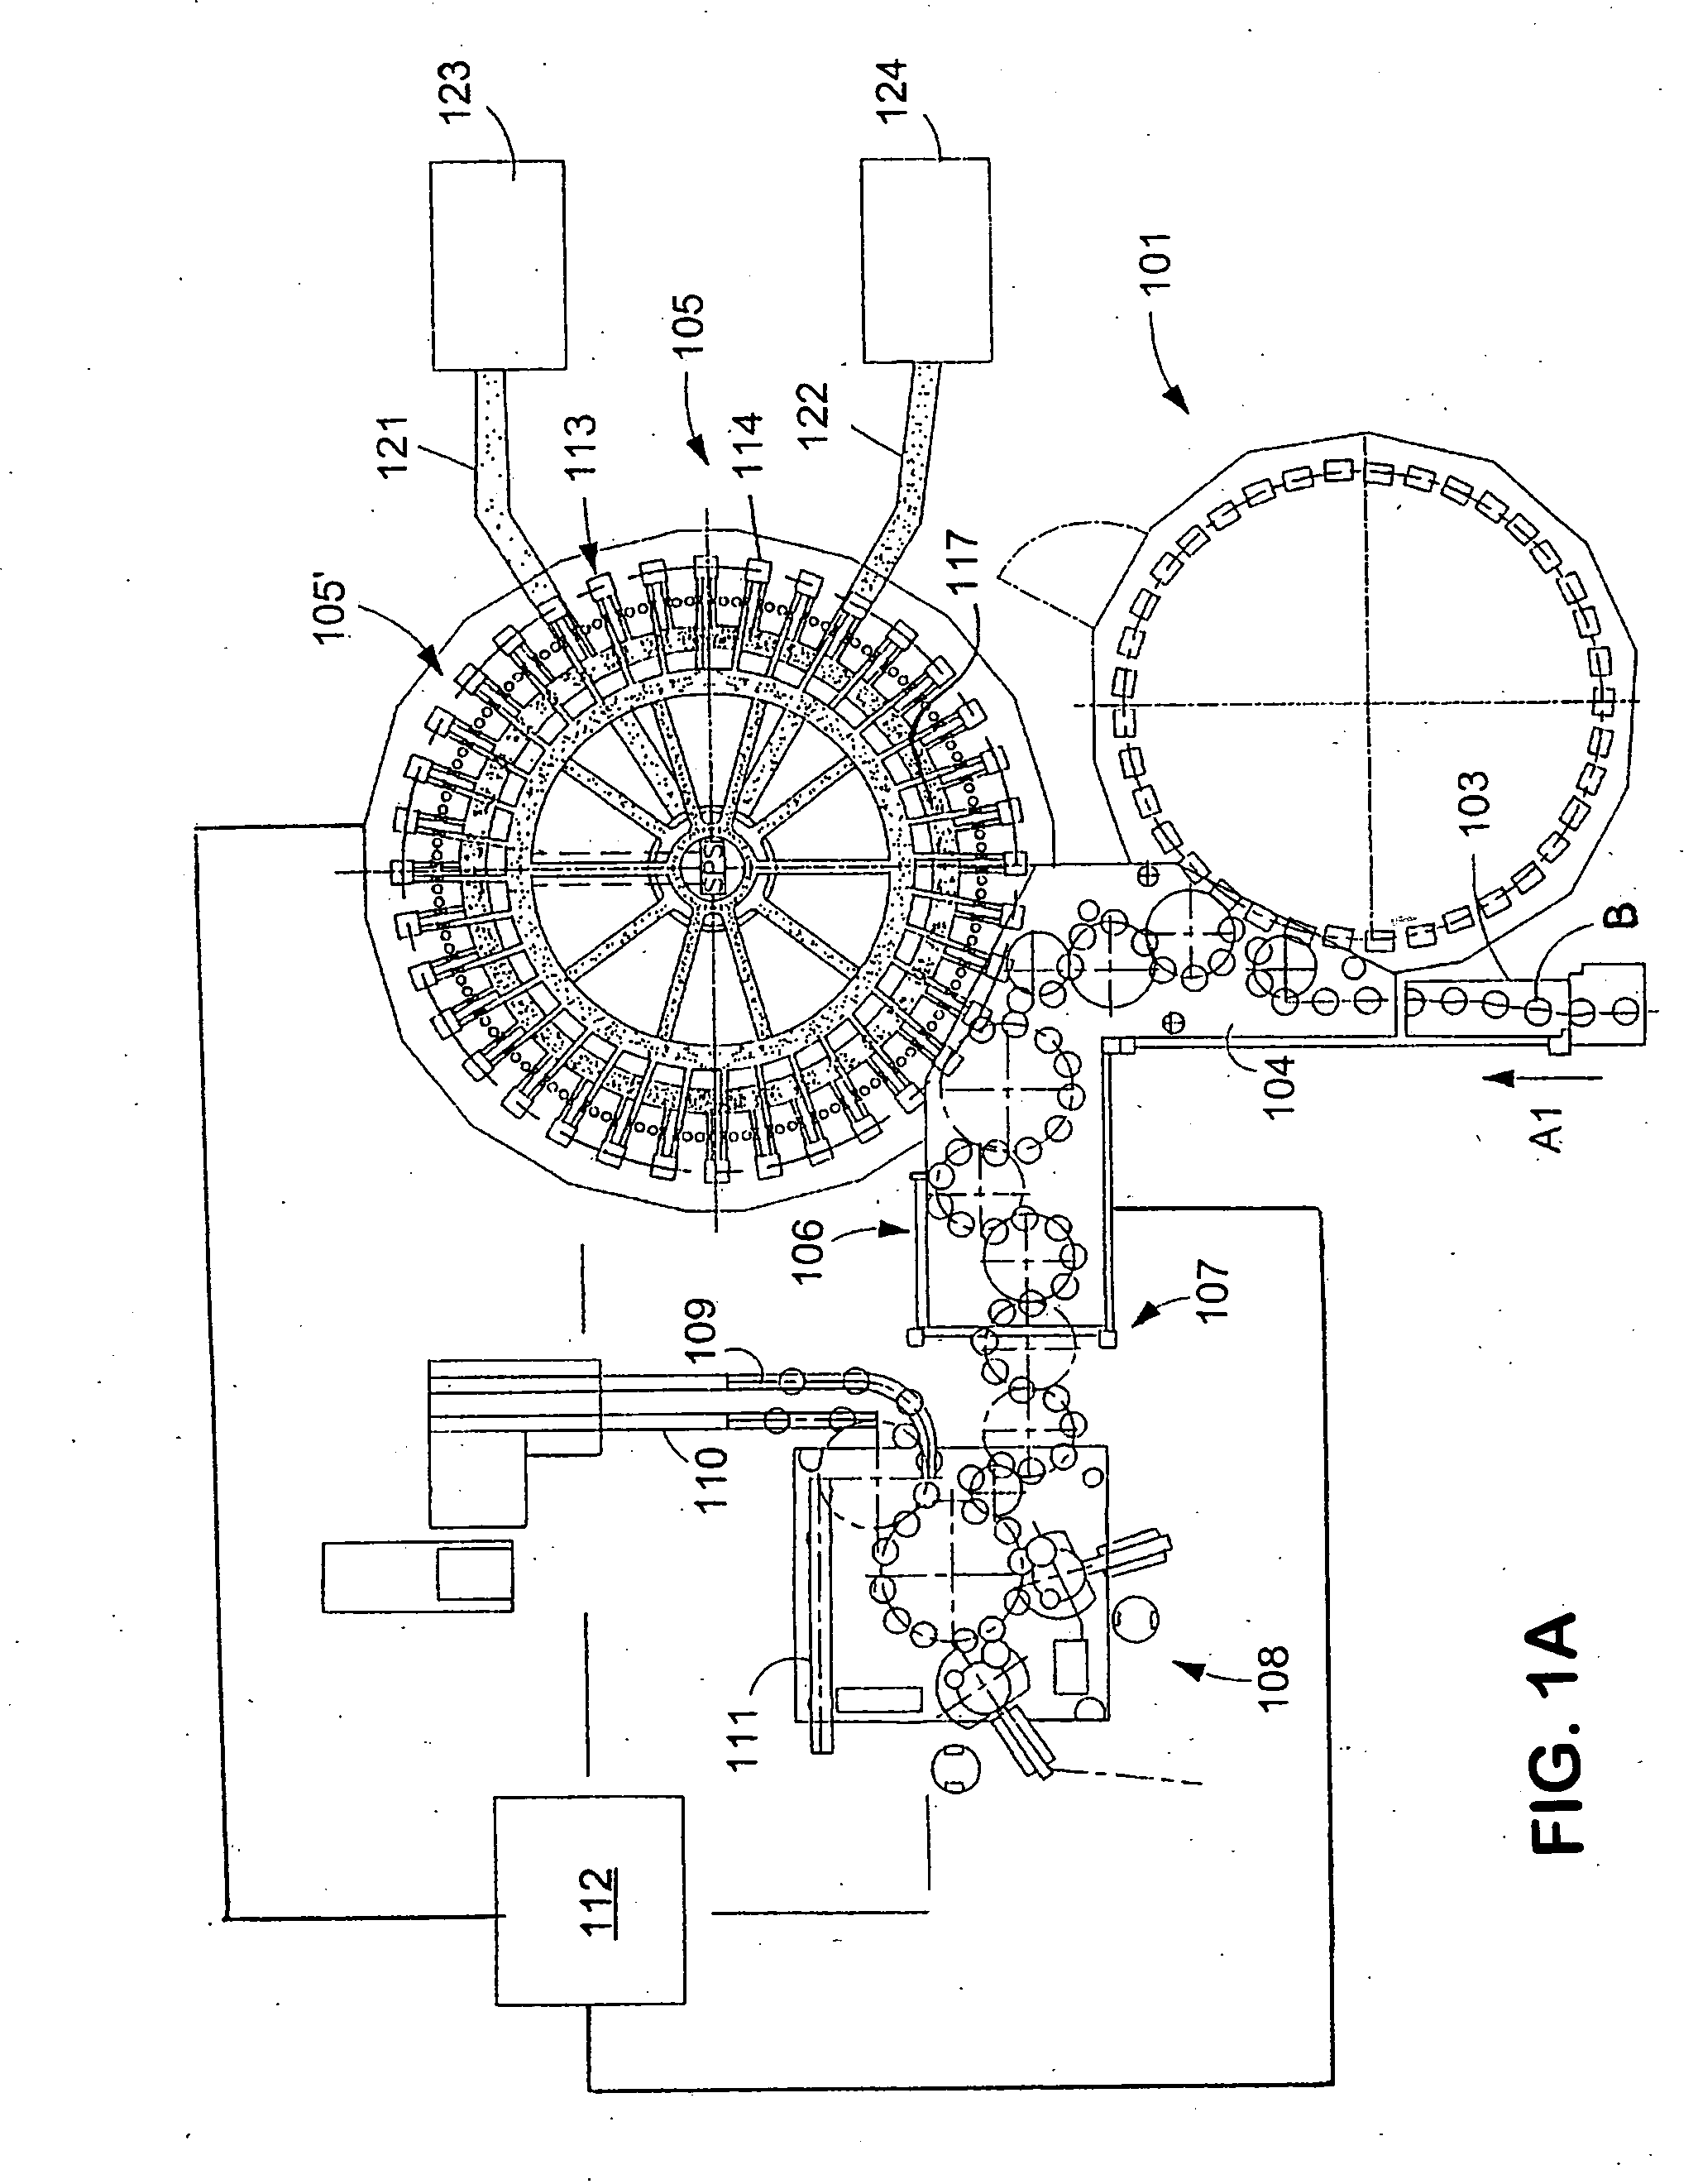 Beverage bottling plant for filling bottles with a liquid beverage having a treatment device for beverage container caps